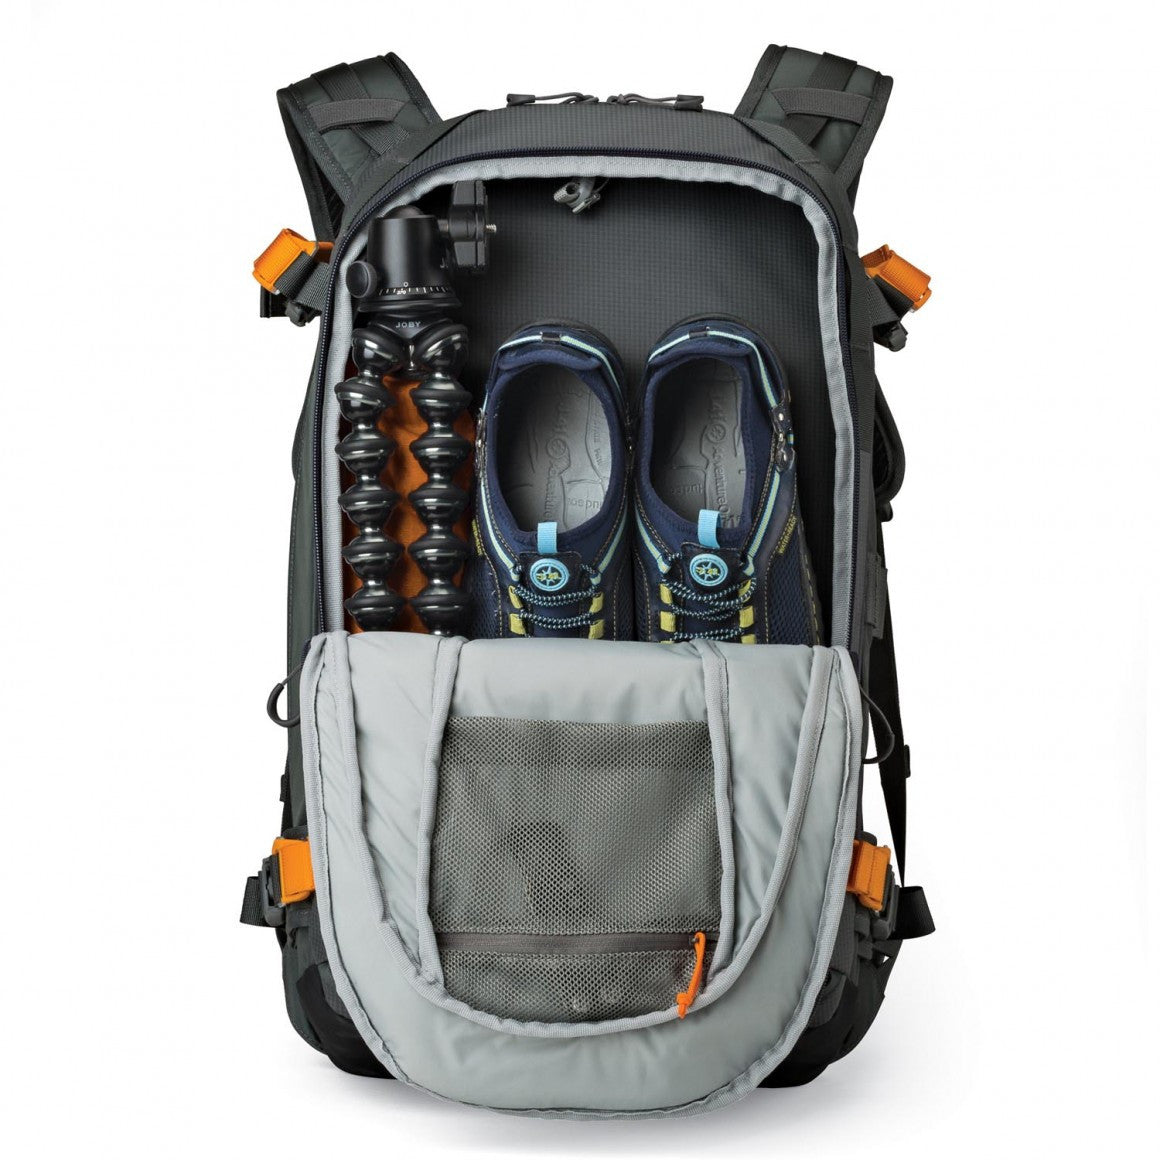 Lowepro Whistler 350AW Backpack (Grey), bags backpacks, Lowepro - Pictureline  - 3